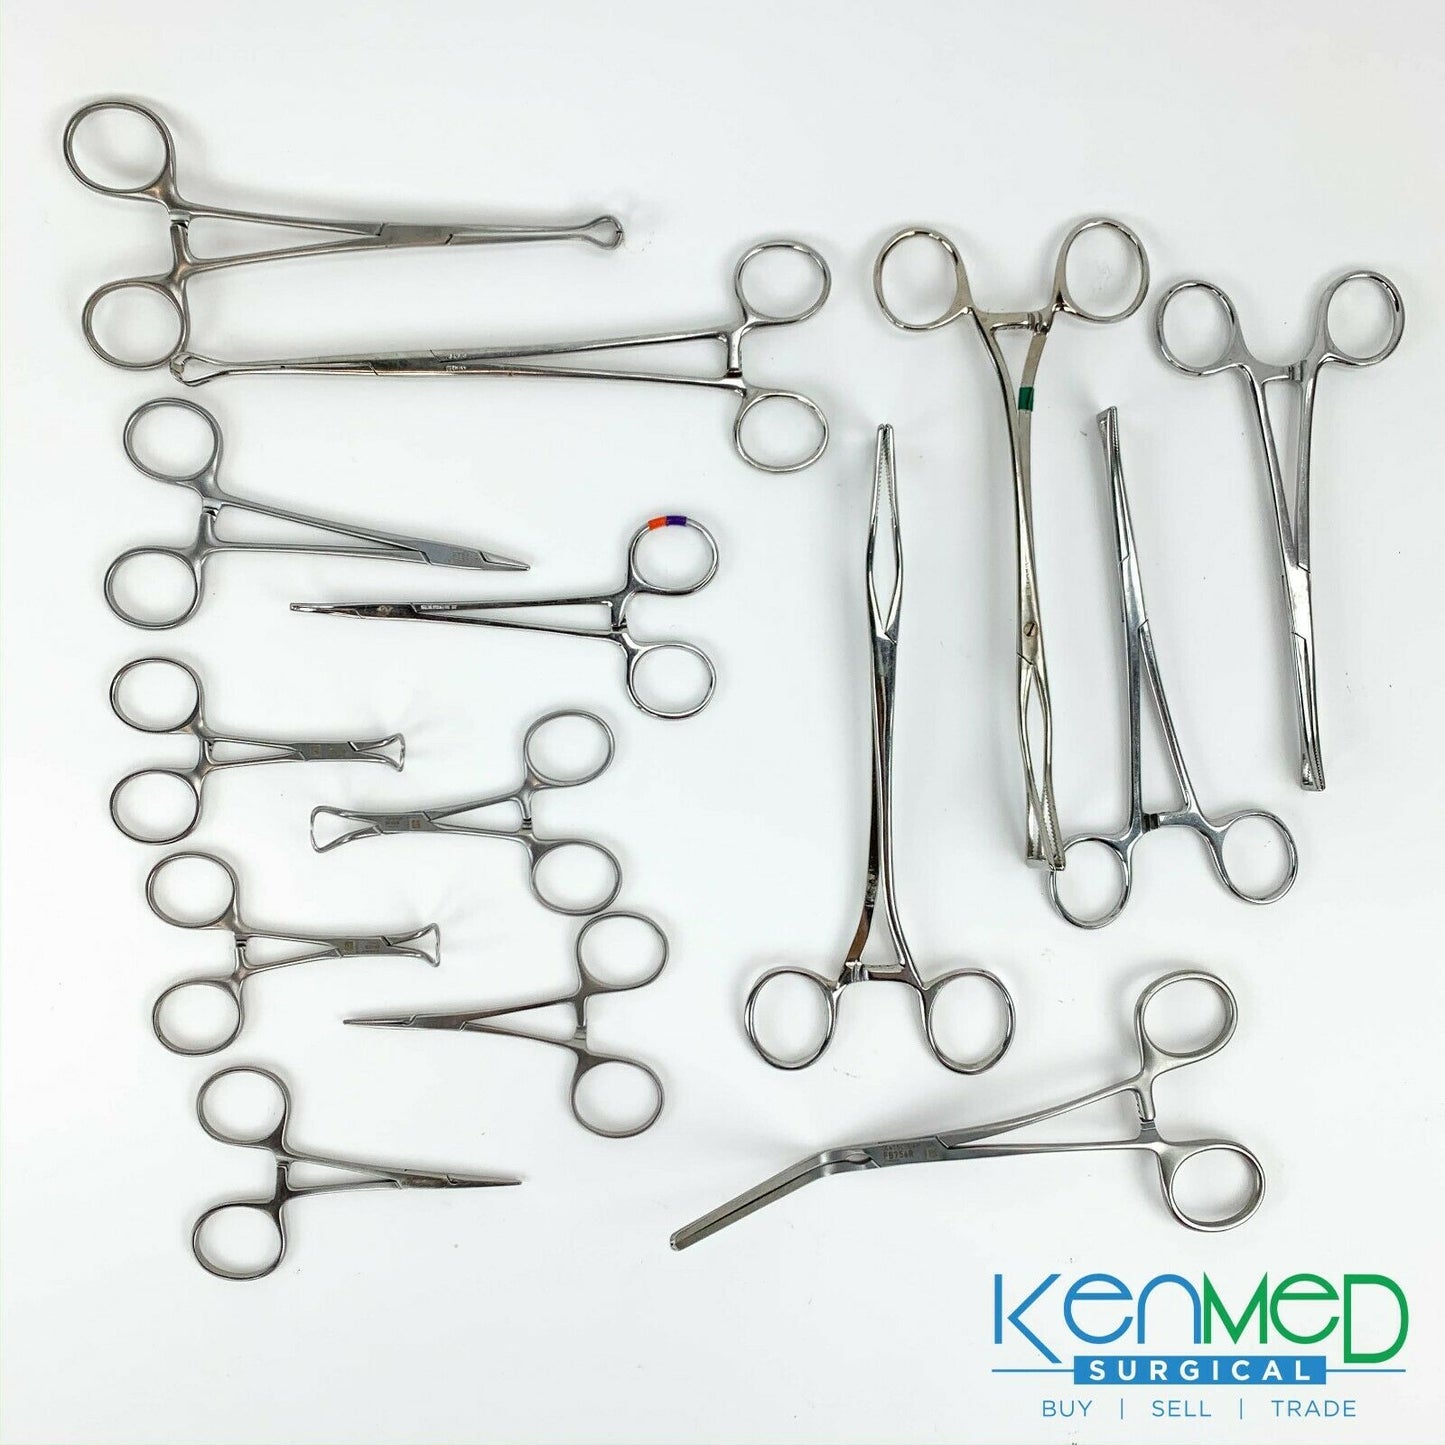 Thoracic Cardiac Clip Applier Instrument Tray - 65 Pieces